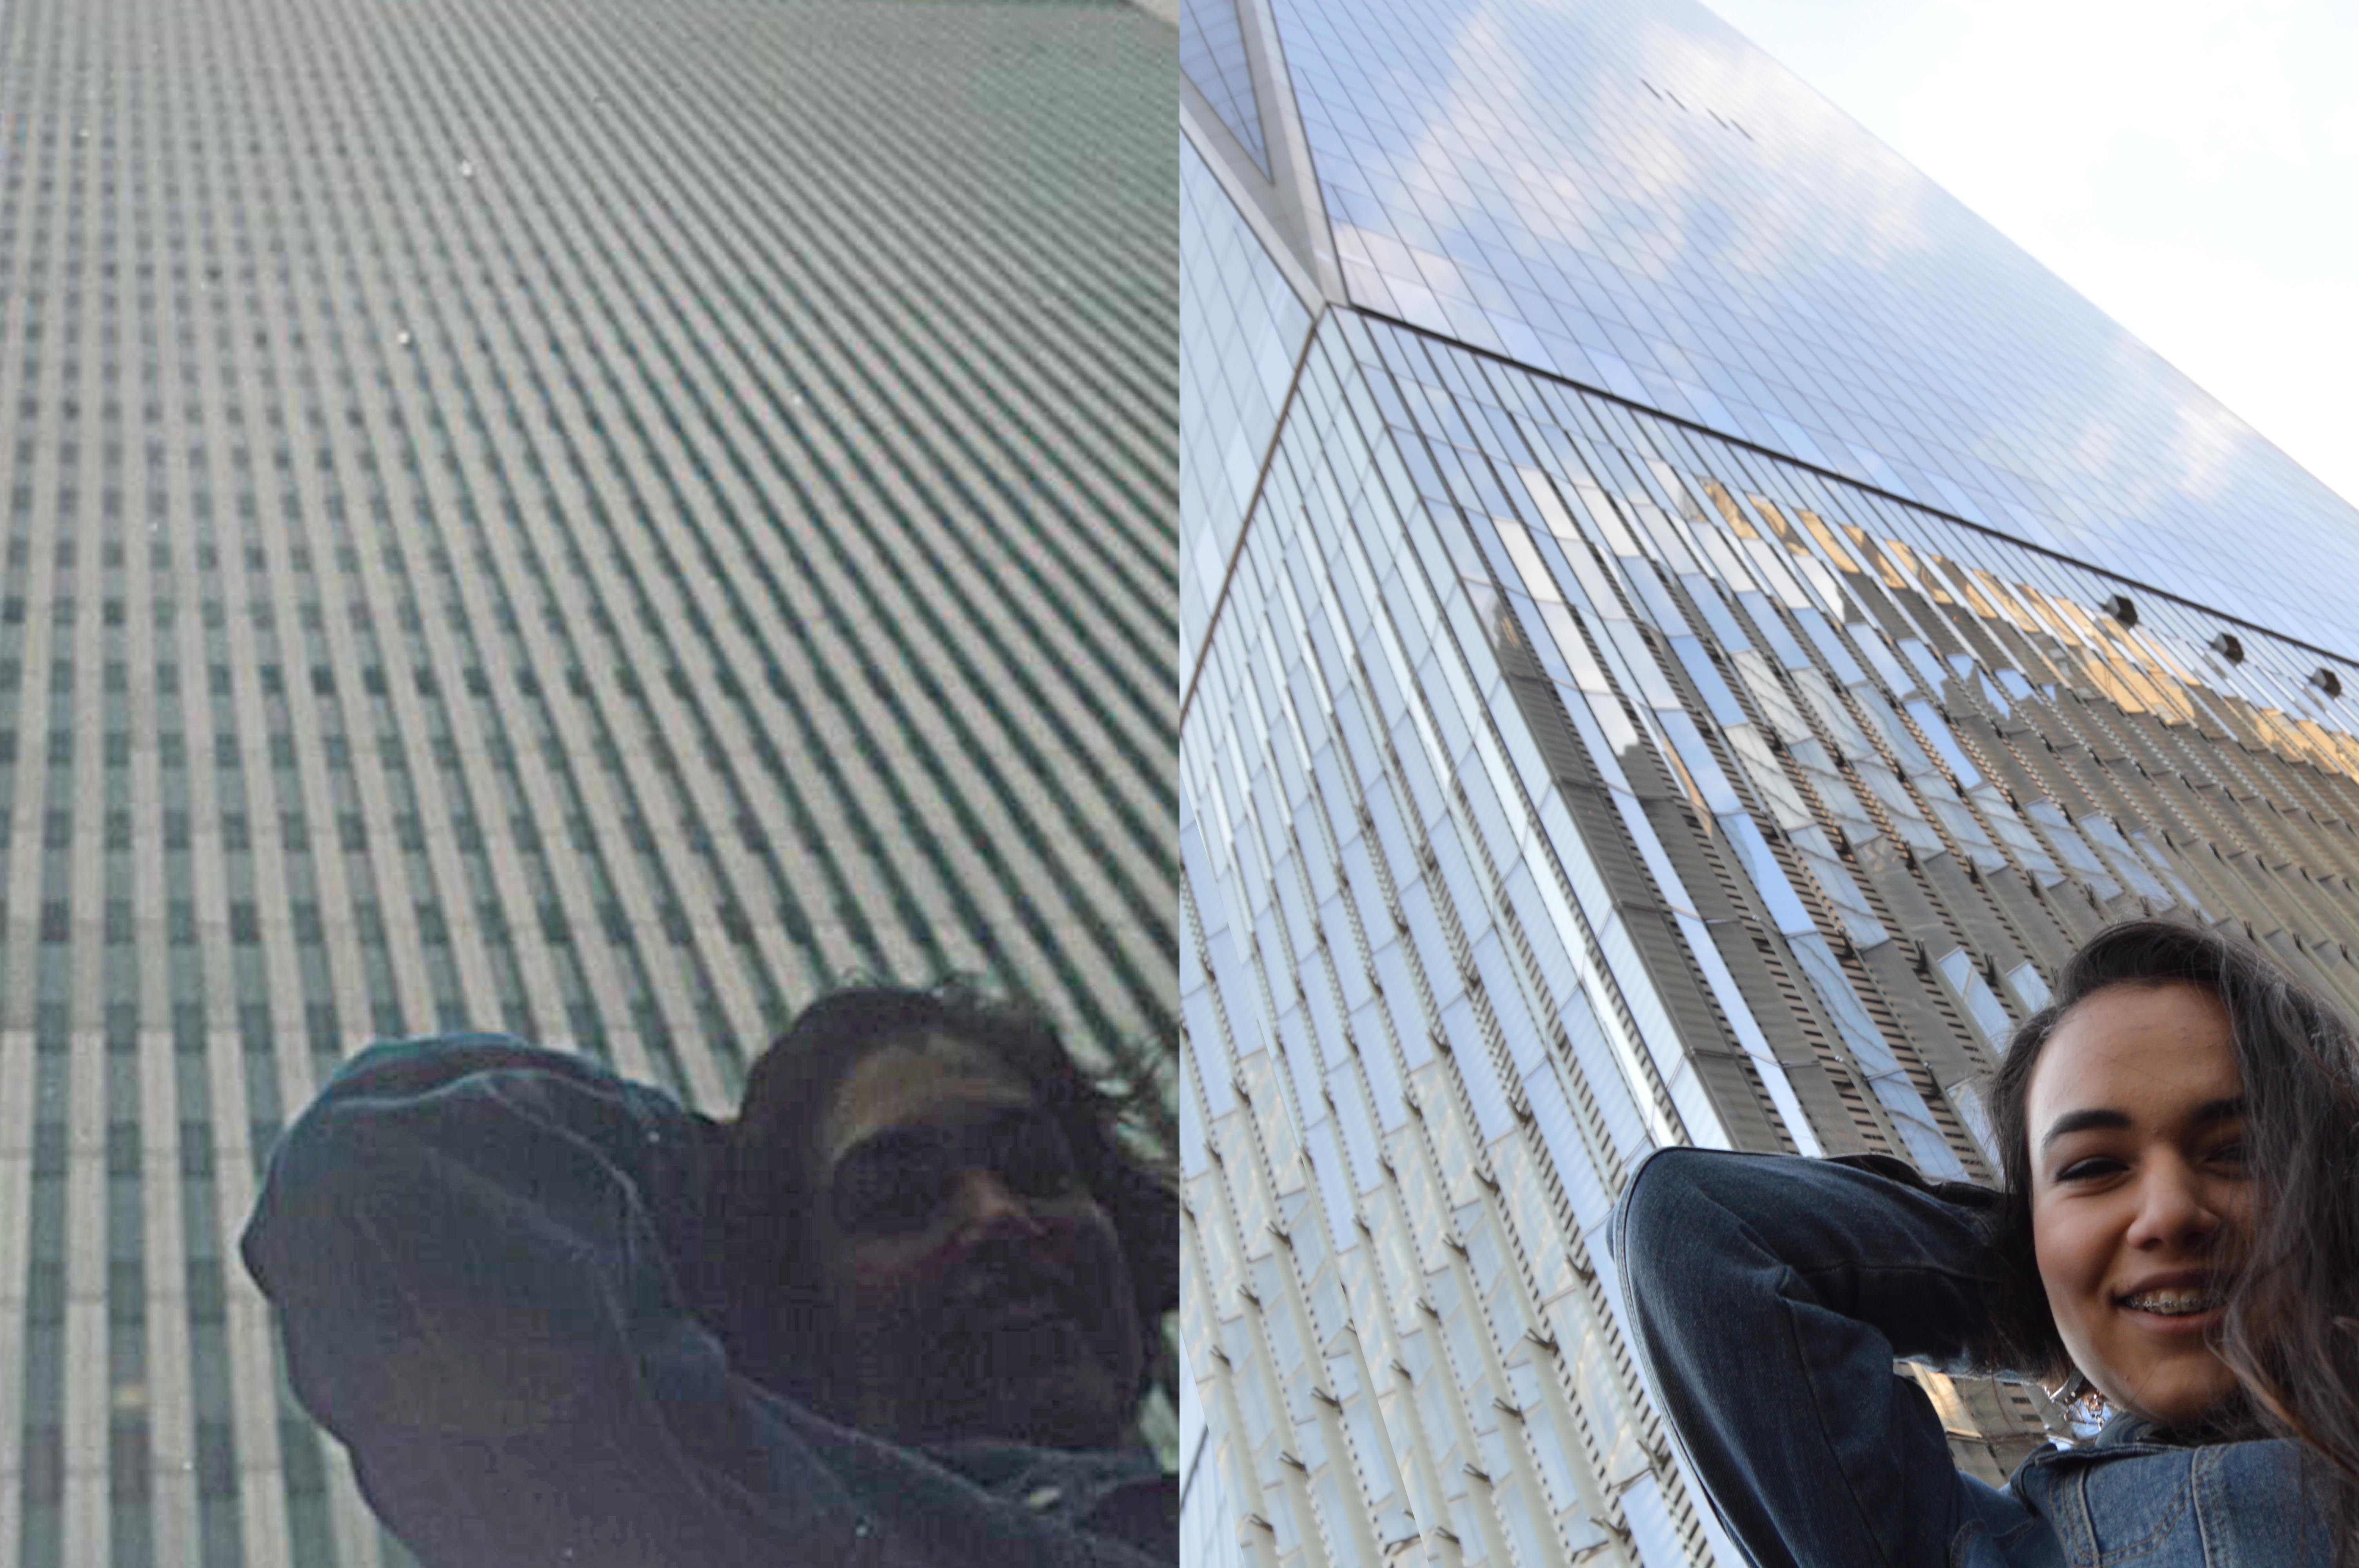 These two photos show Marcela Segovia and her mother posing for the same photo at the World Trade Center decades apart. Segovia is standing in front of One World Trade Center in 2015 and her mother is standing in front of the Twin Towers in 1993.